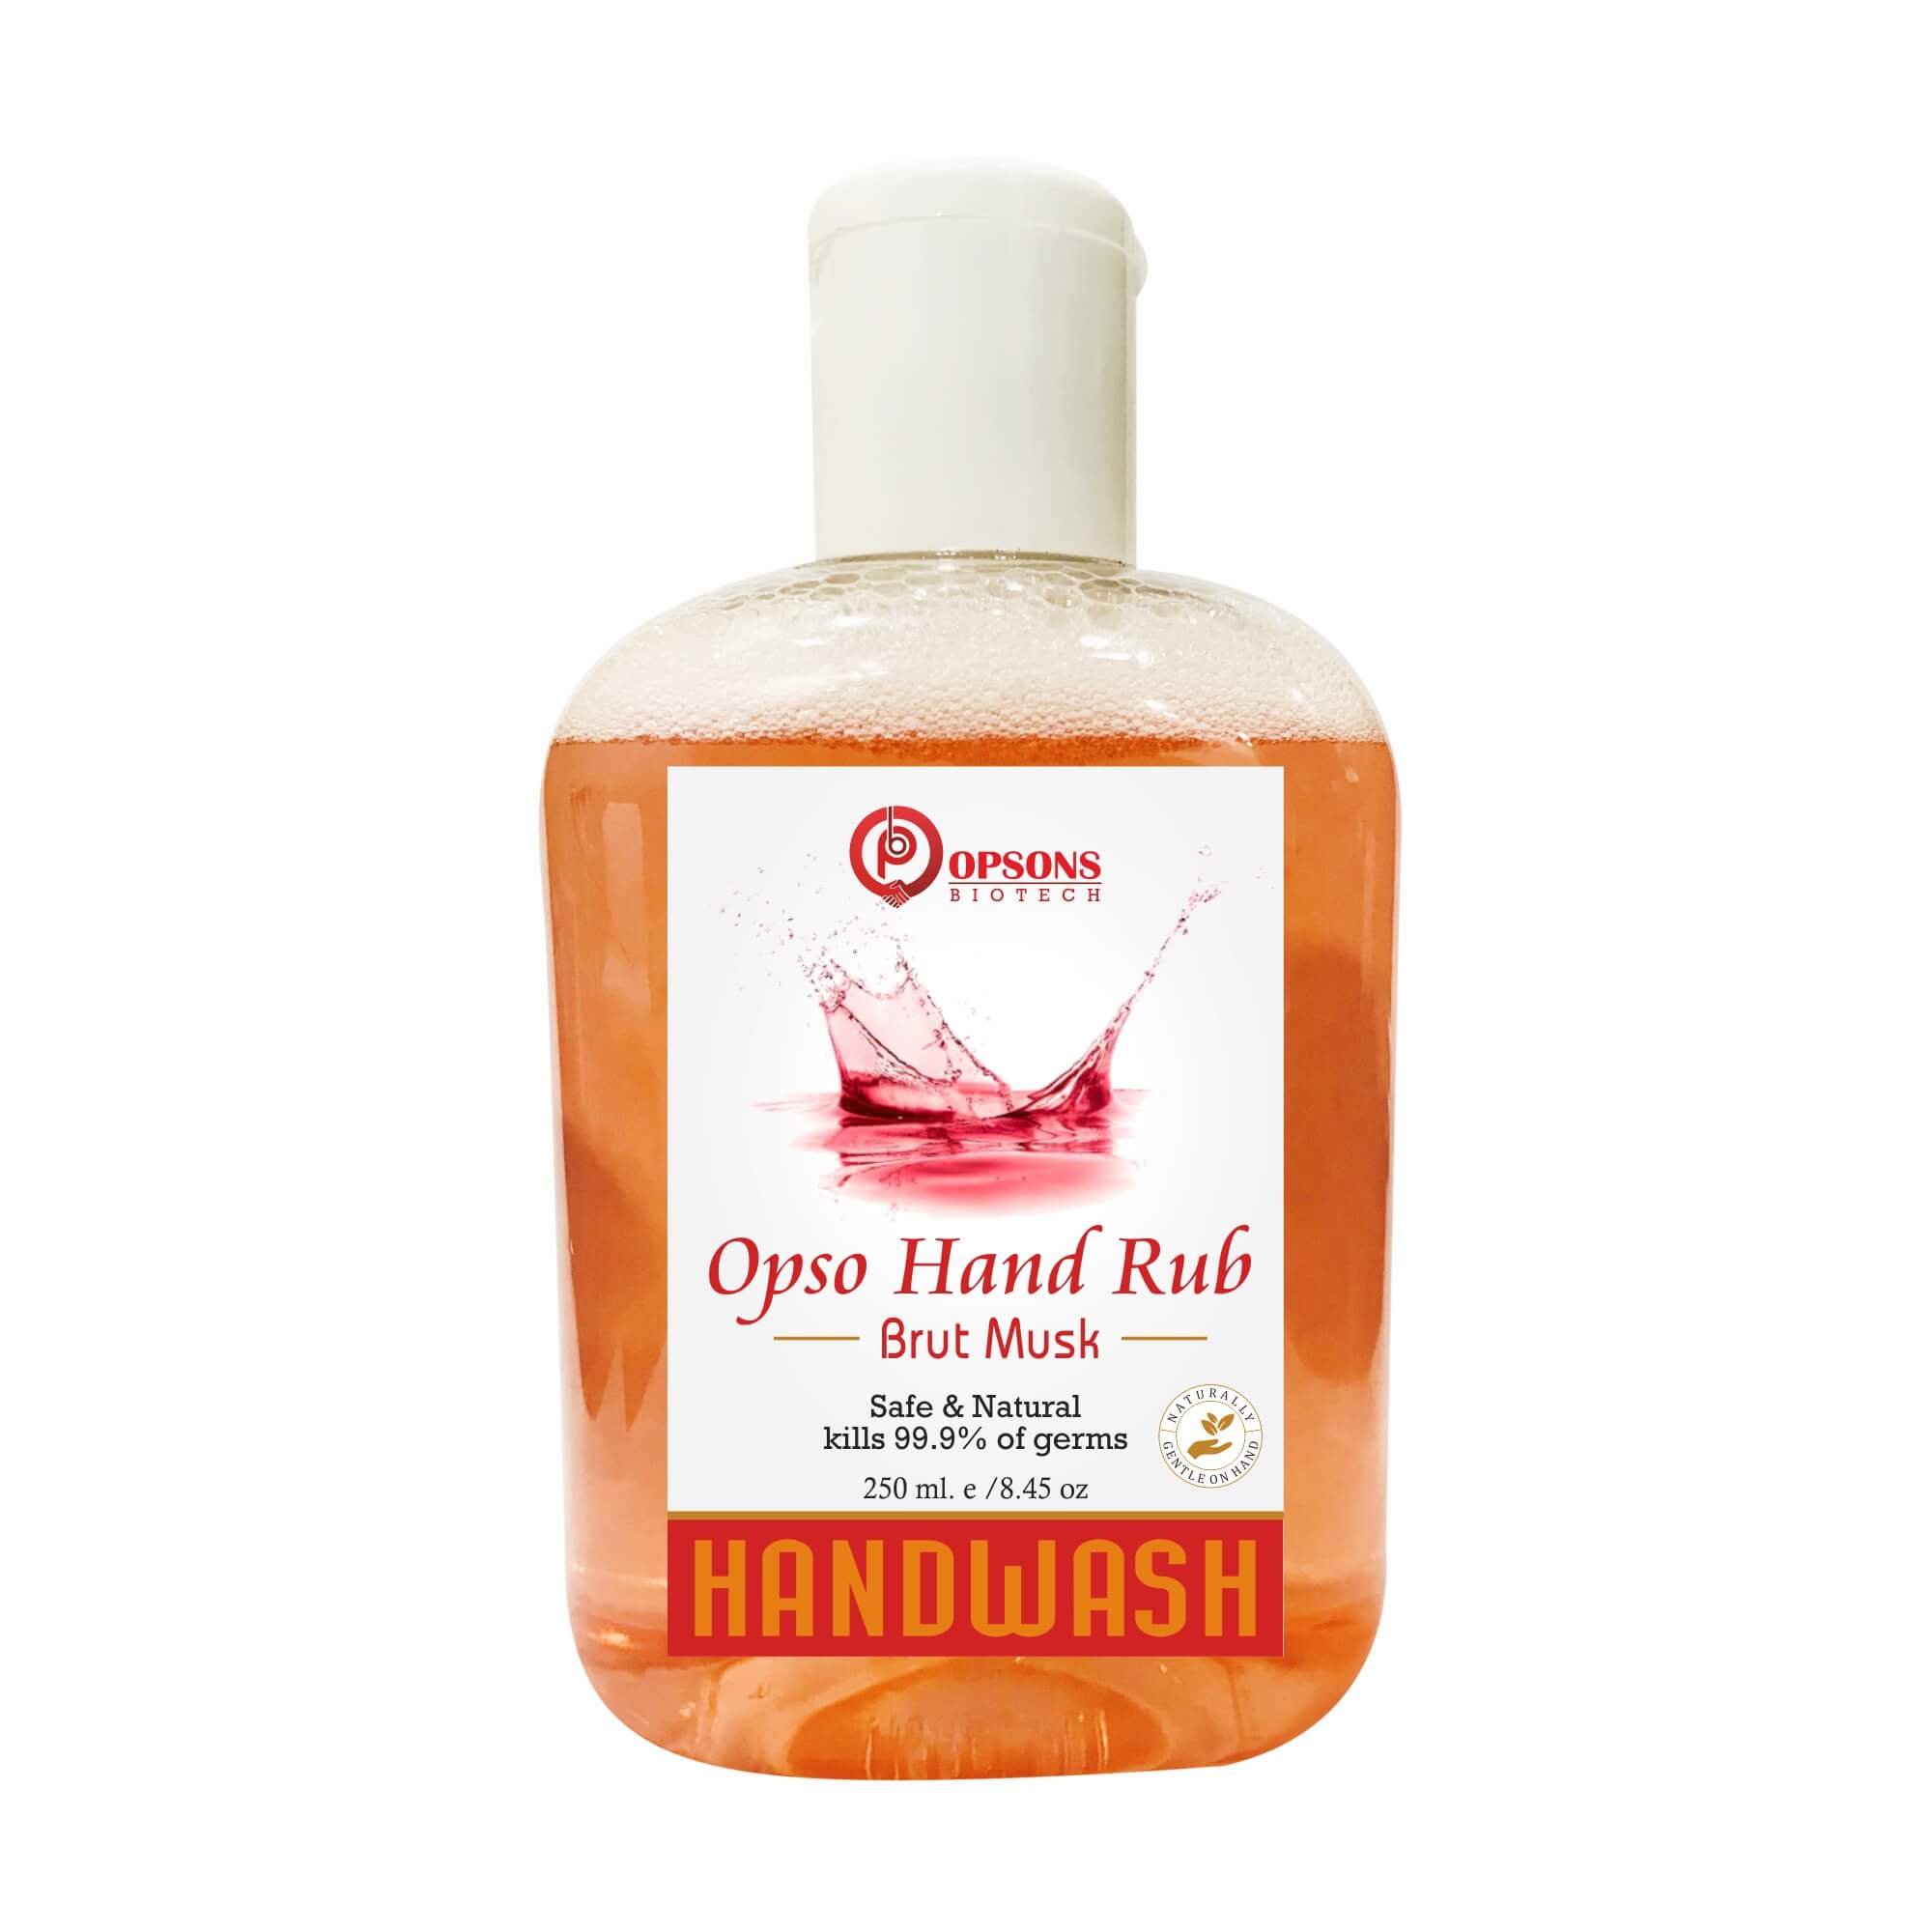 Product Name: Opso Hand Rub Mask, Compositions of Opso Hand Rub Mask are Opso Hand Rub - Opsons Biotech